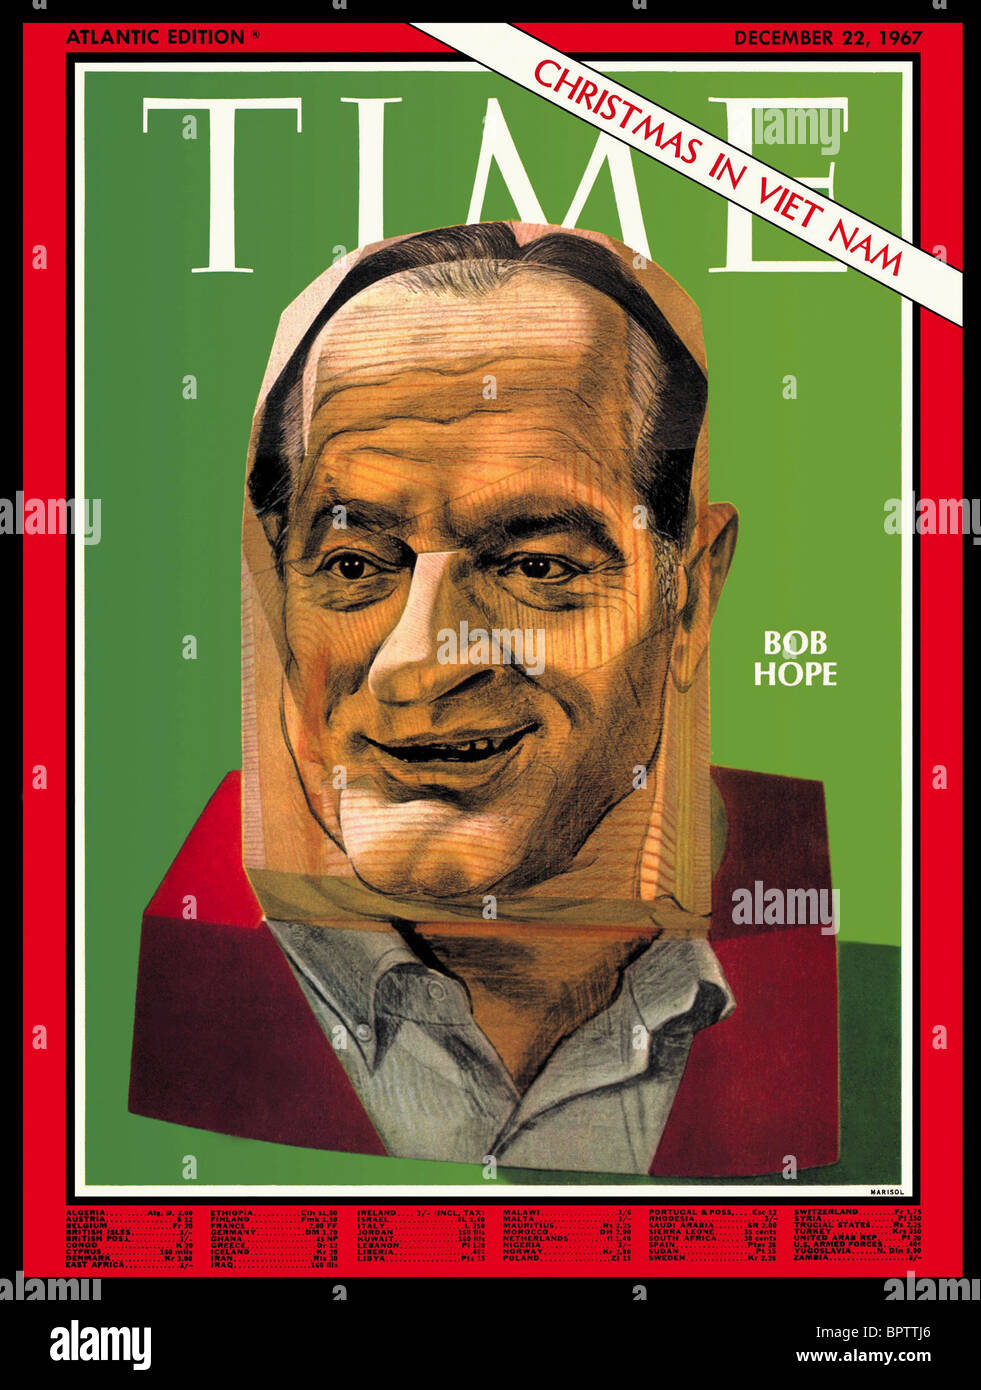 BOB HOPE TIME MAGAZINE COVER ACTOR ON MAGZINE COVER (1967) Stock Photo